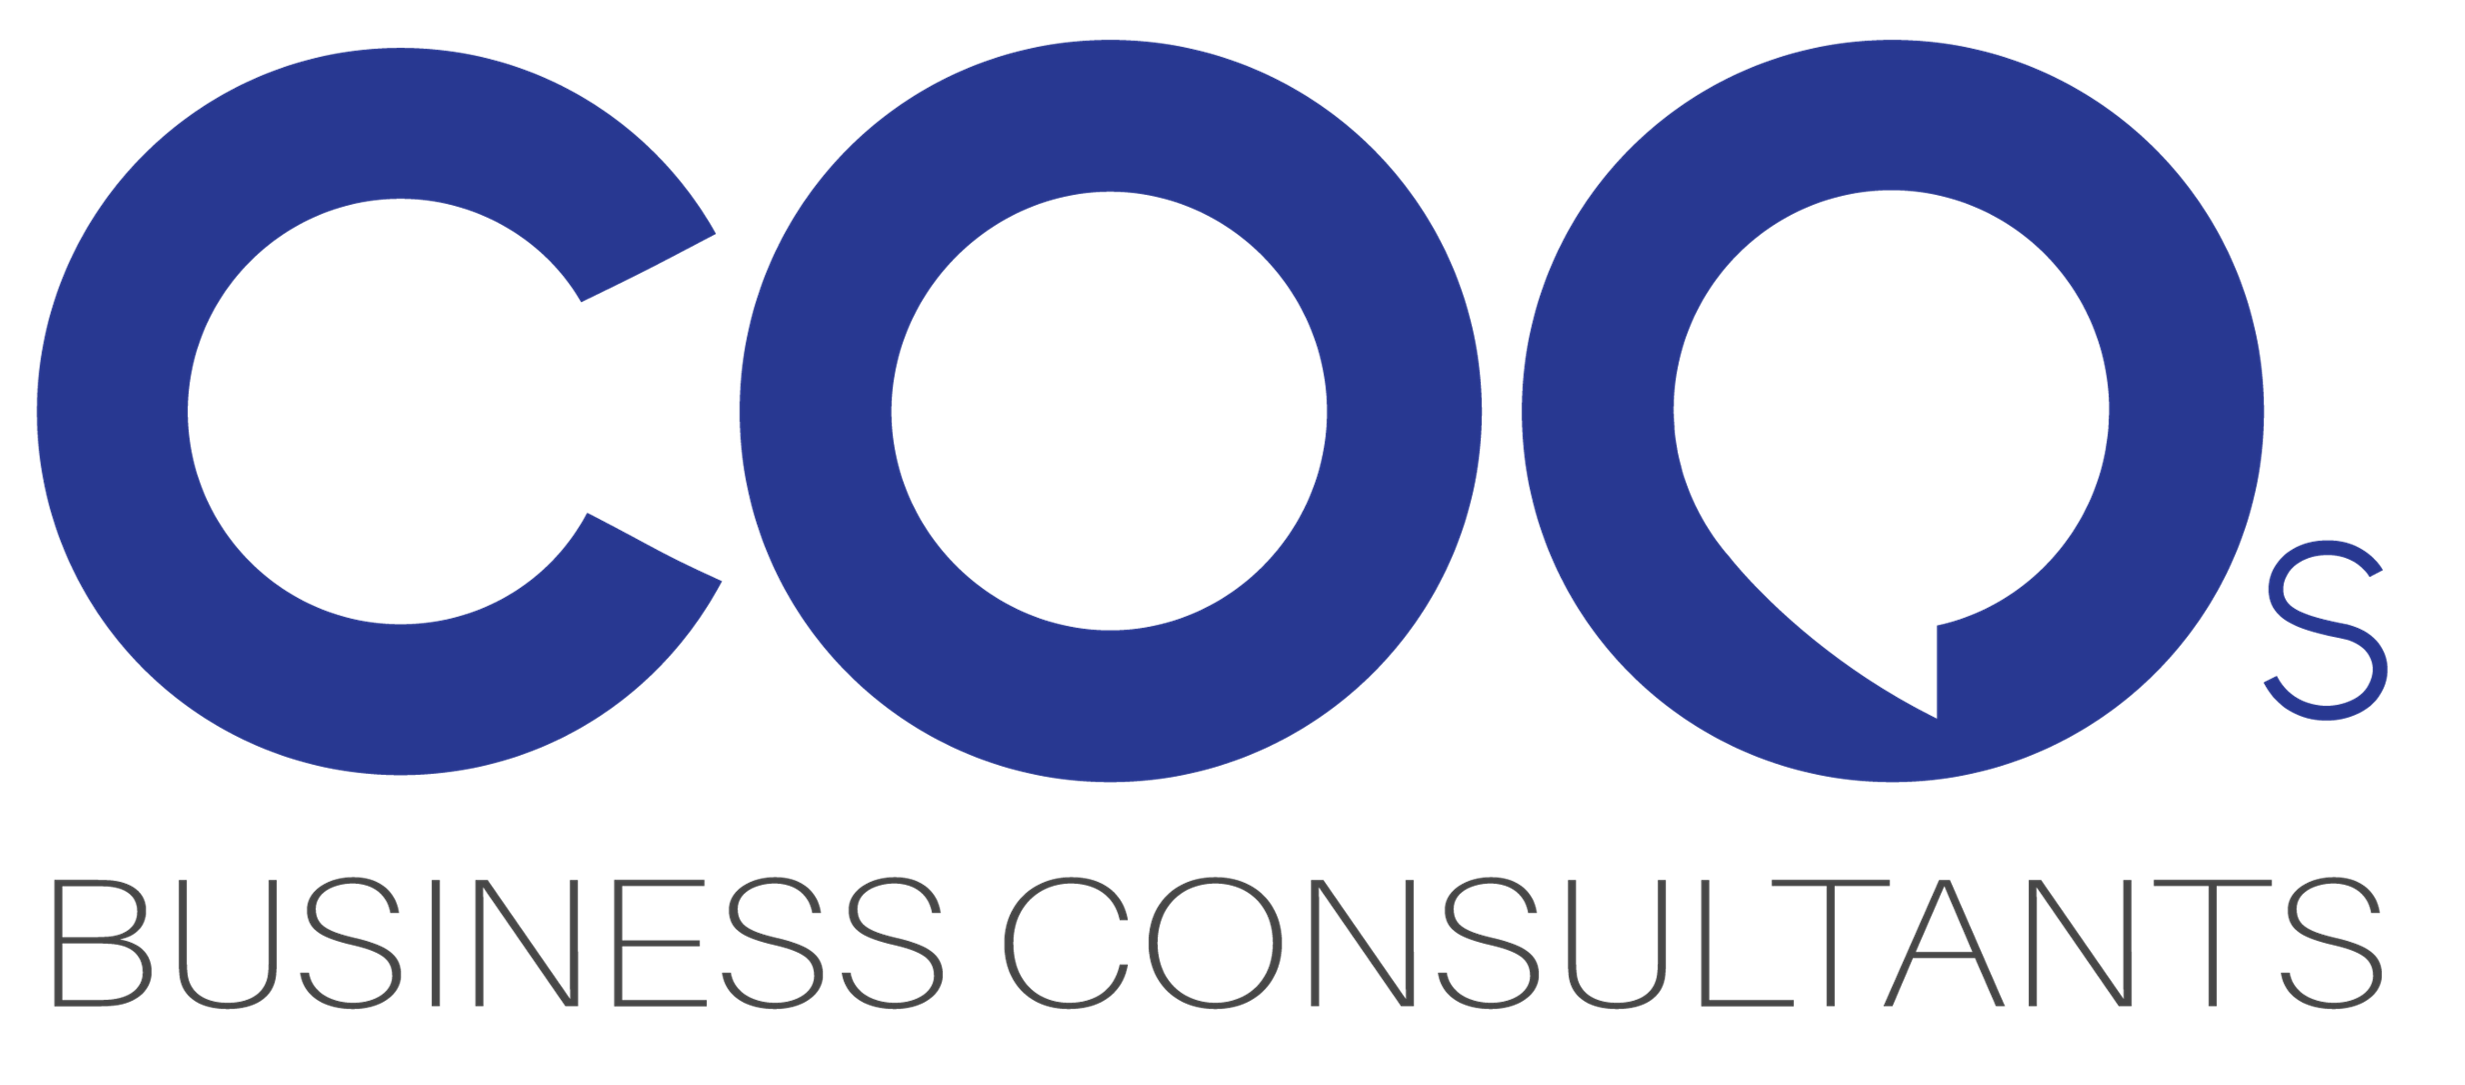 Recruitment Agency – COOs